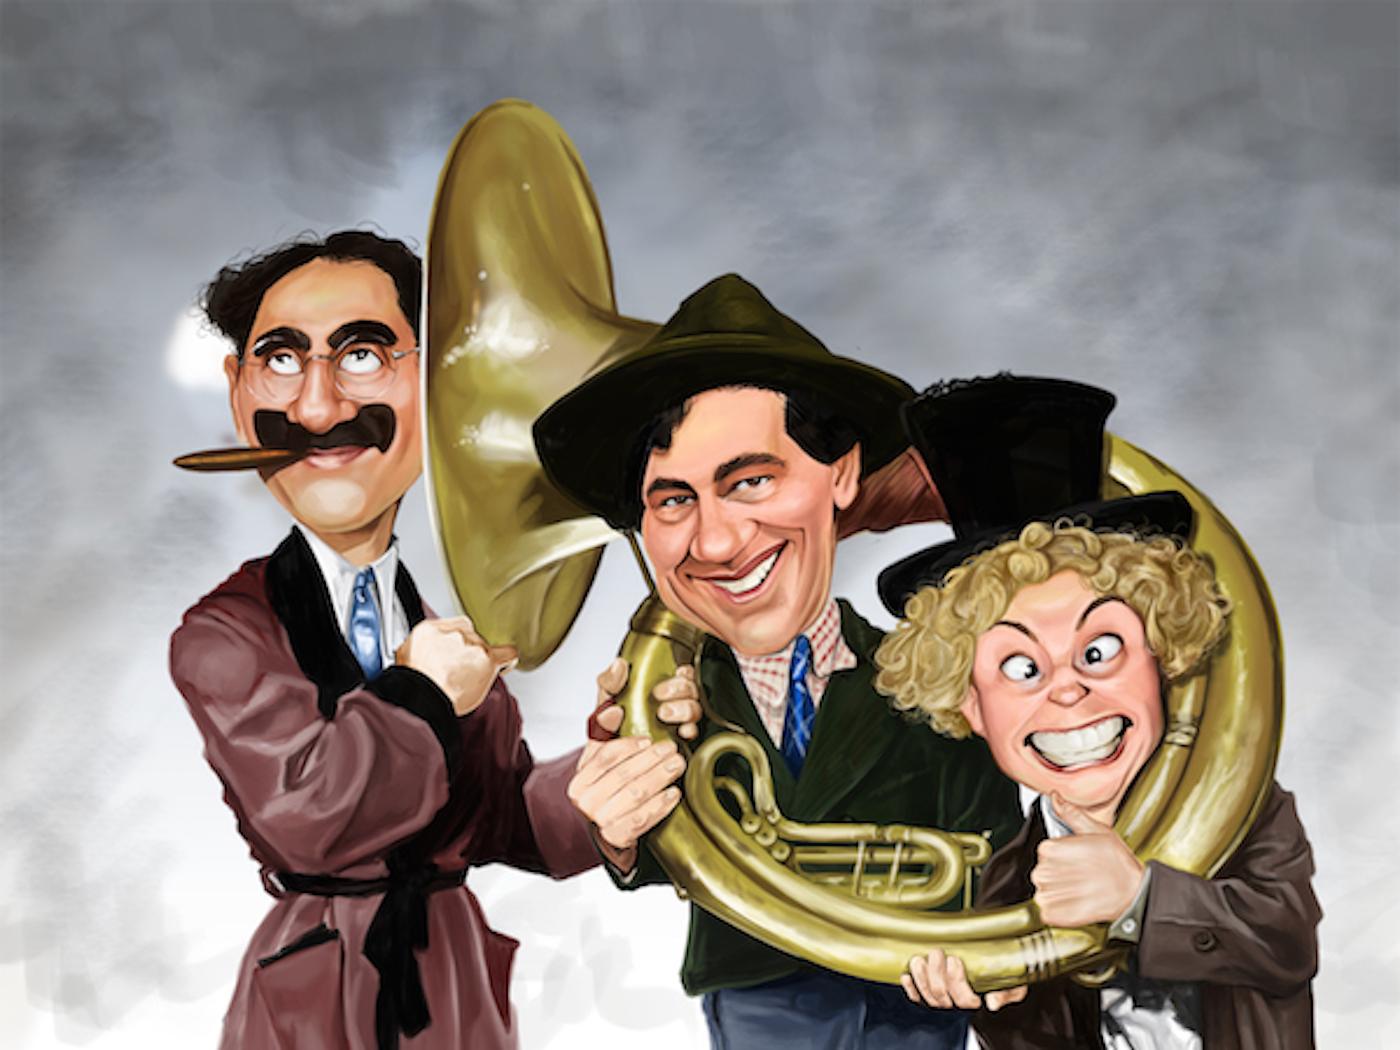 Rich Conley Interior Print - The Marx Brothers® Licensed Artwork